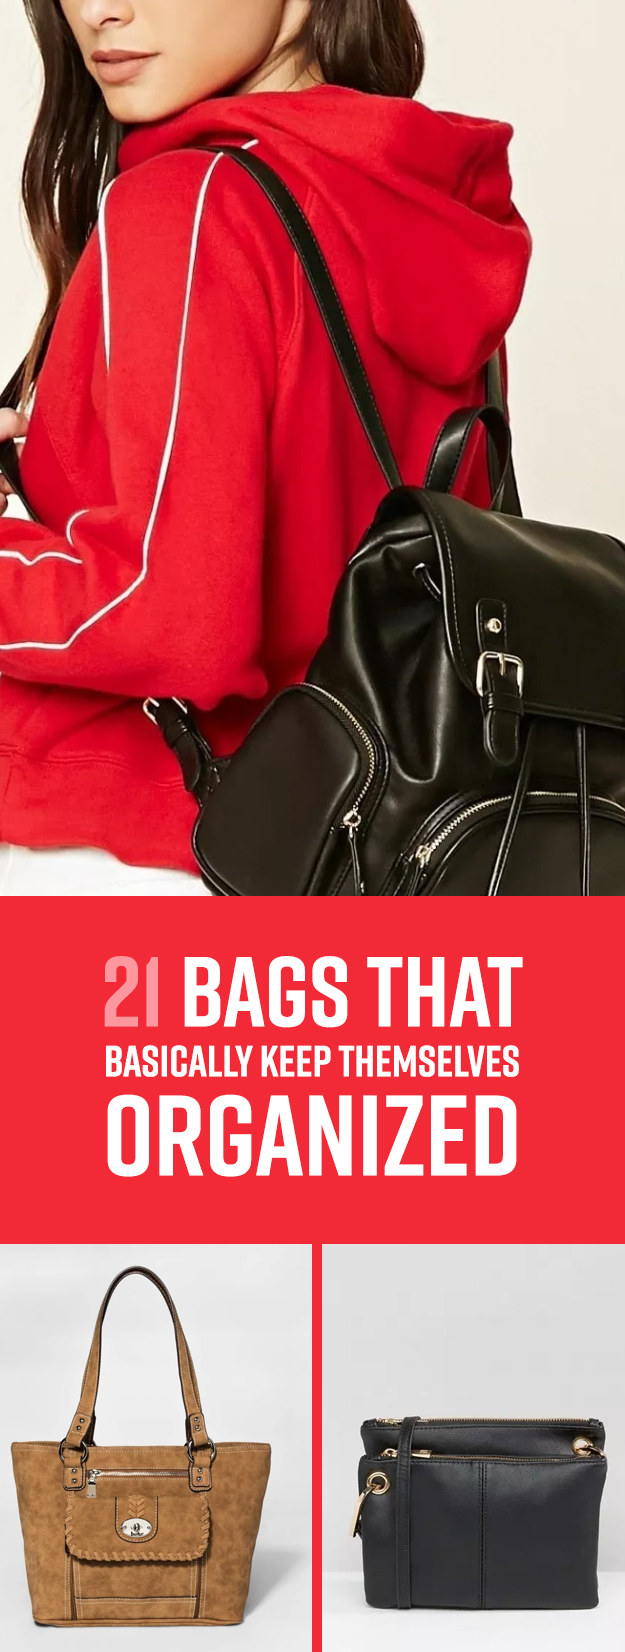 21 Useful Bags That Are Organized So 